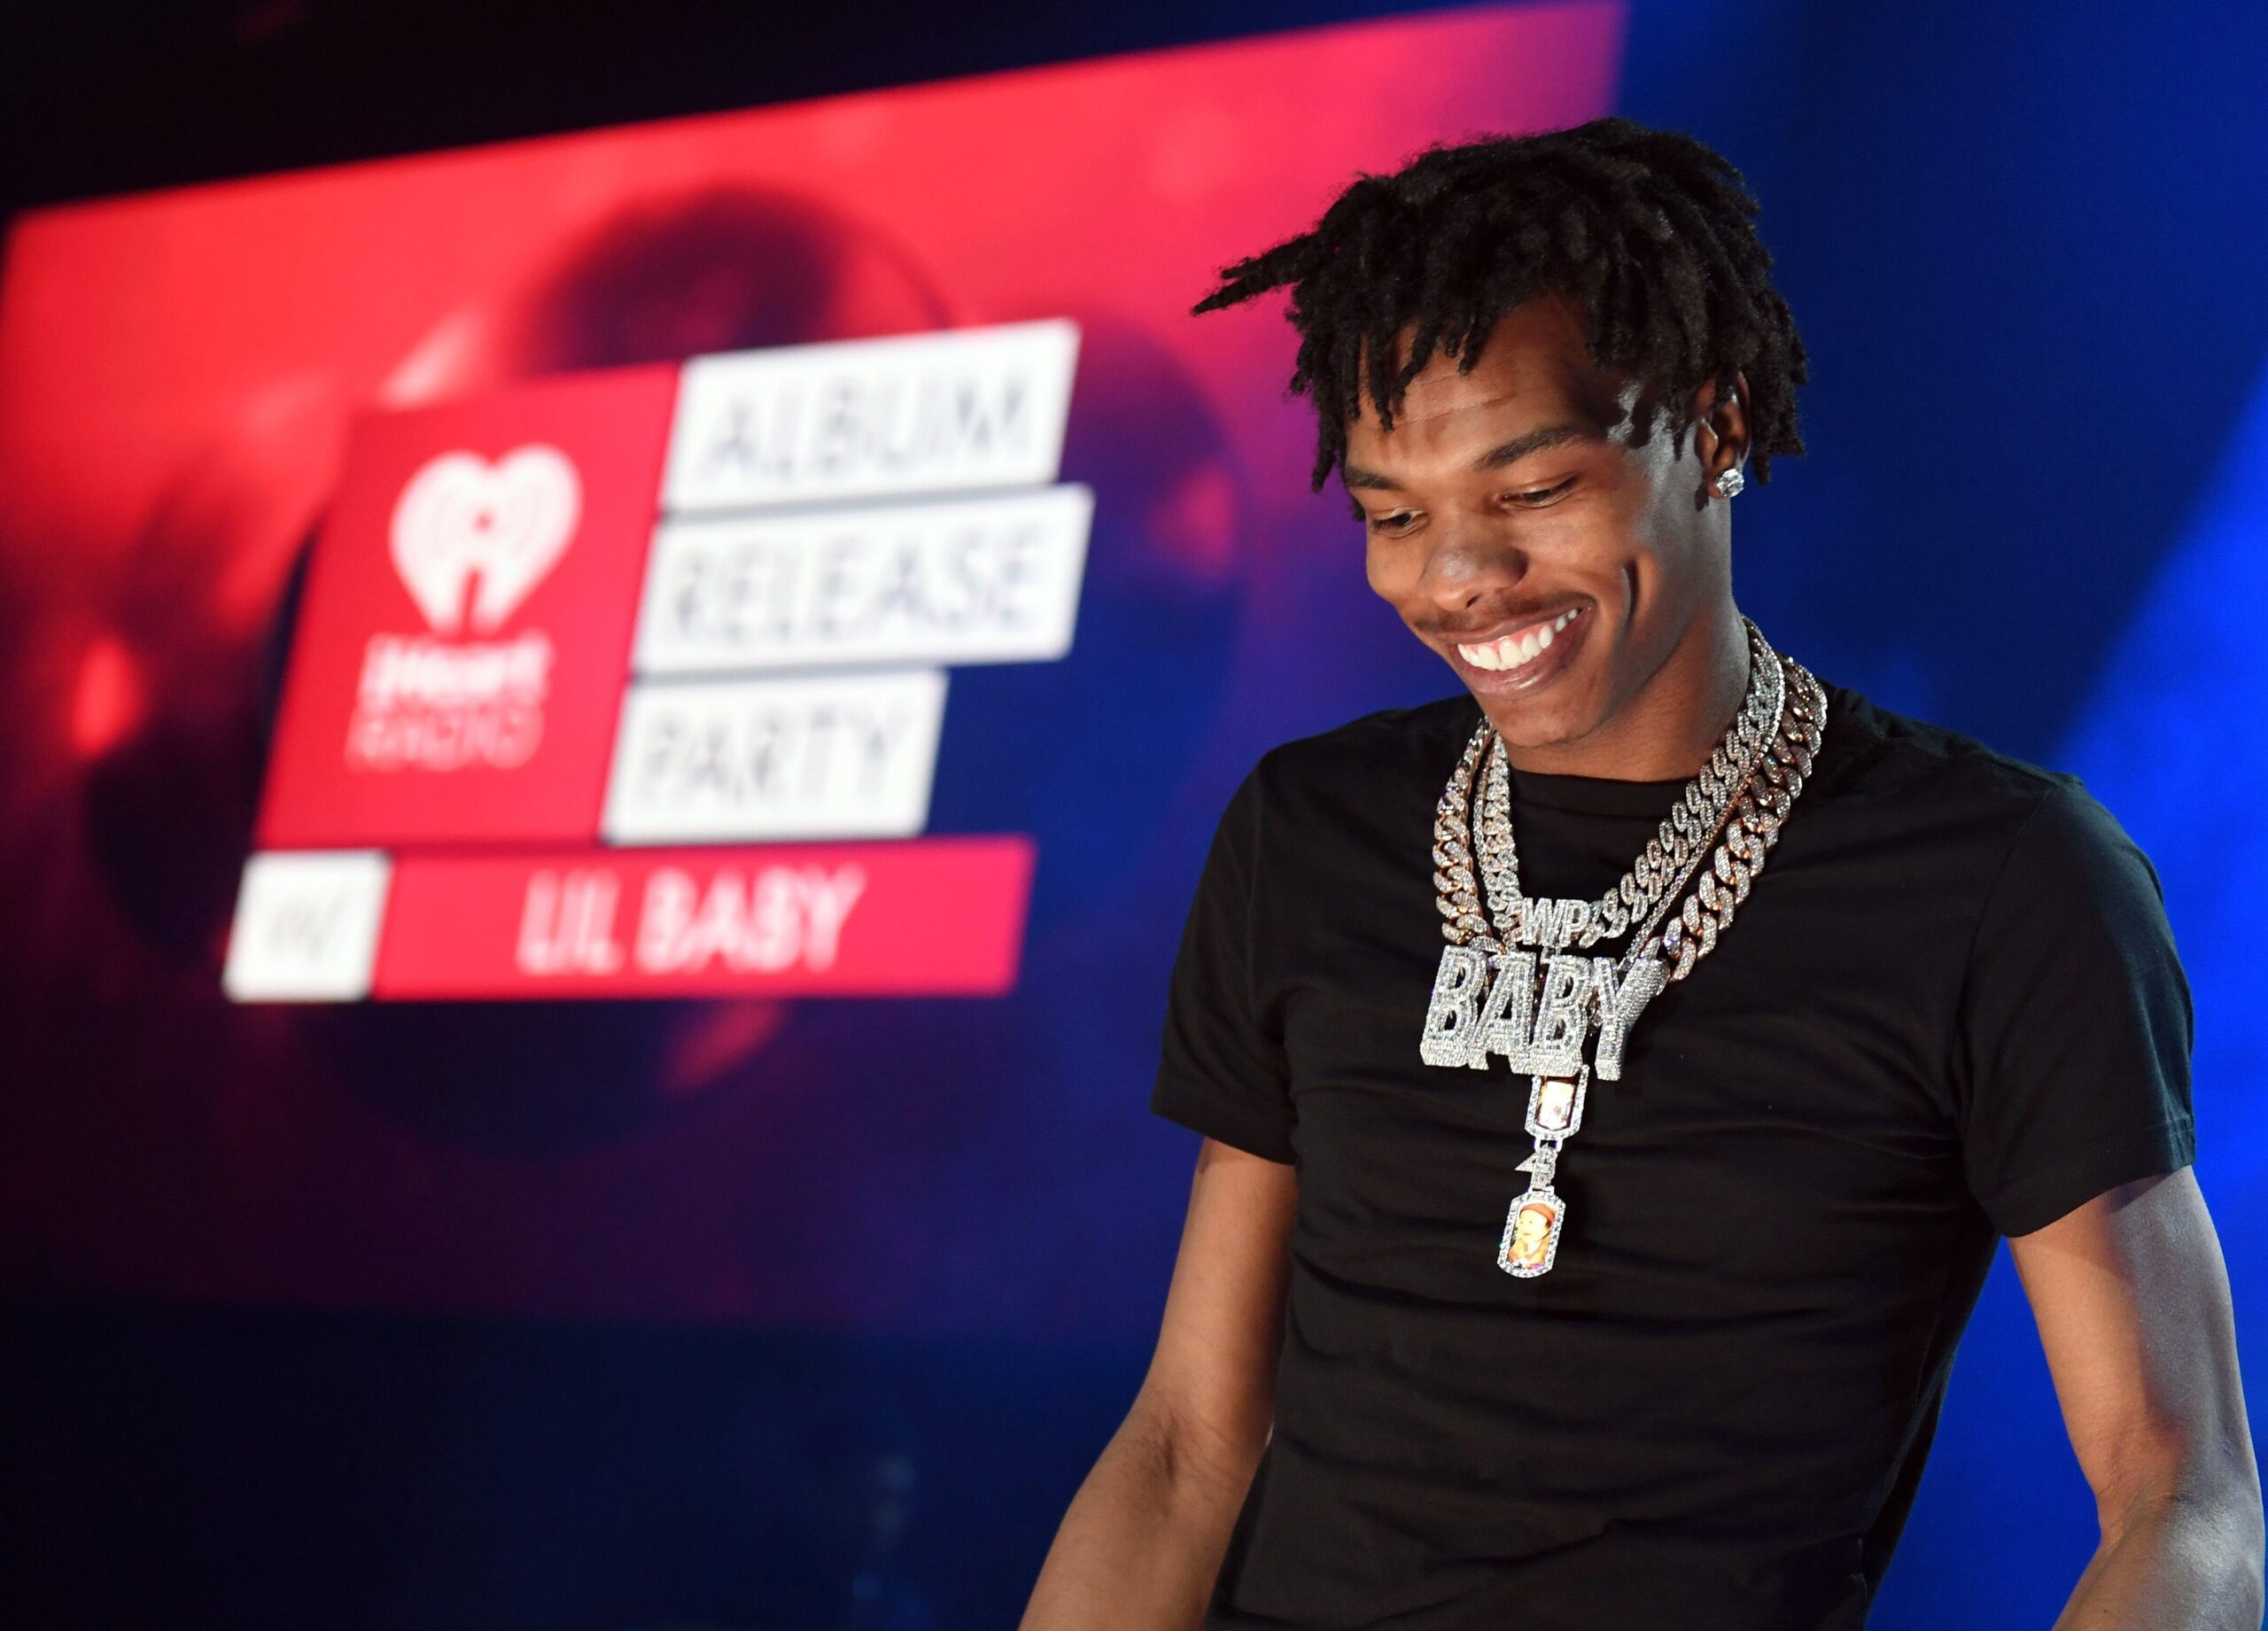 SPOTTED: Lil Baby Kicks Off Festival Season in Full Louis Vuitton Fit –  PAUSE Online